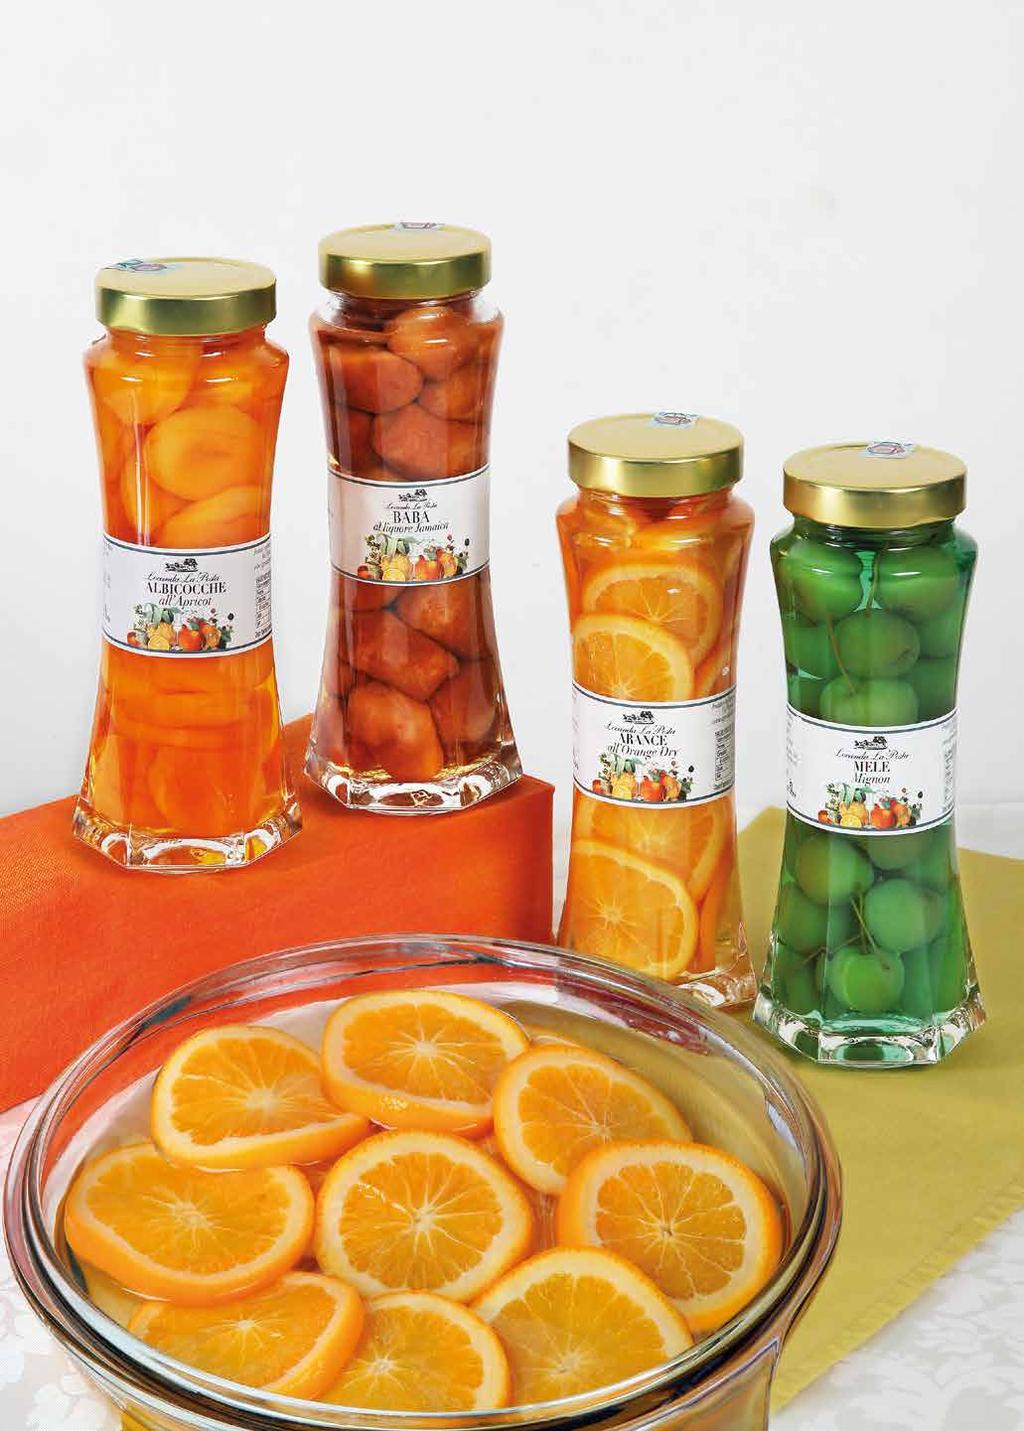 Fruits in alcohol 07500 Apricots in liqueur 540 07505 Pineapple in Maraschino 560 07510 Orange in Dry liqueur 560